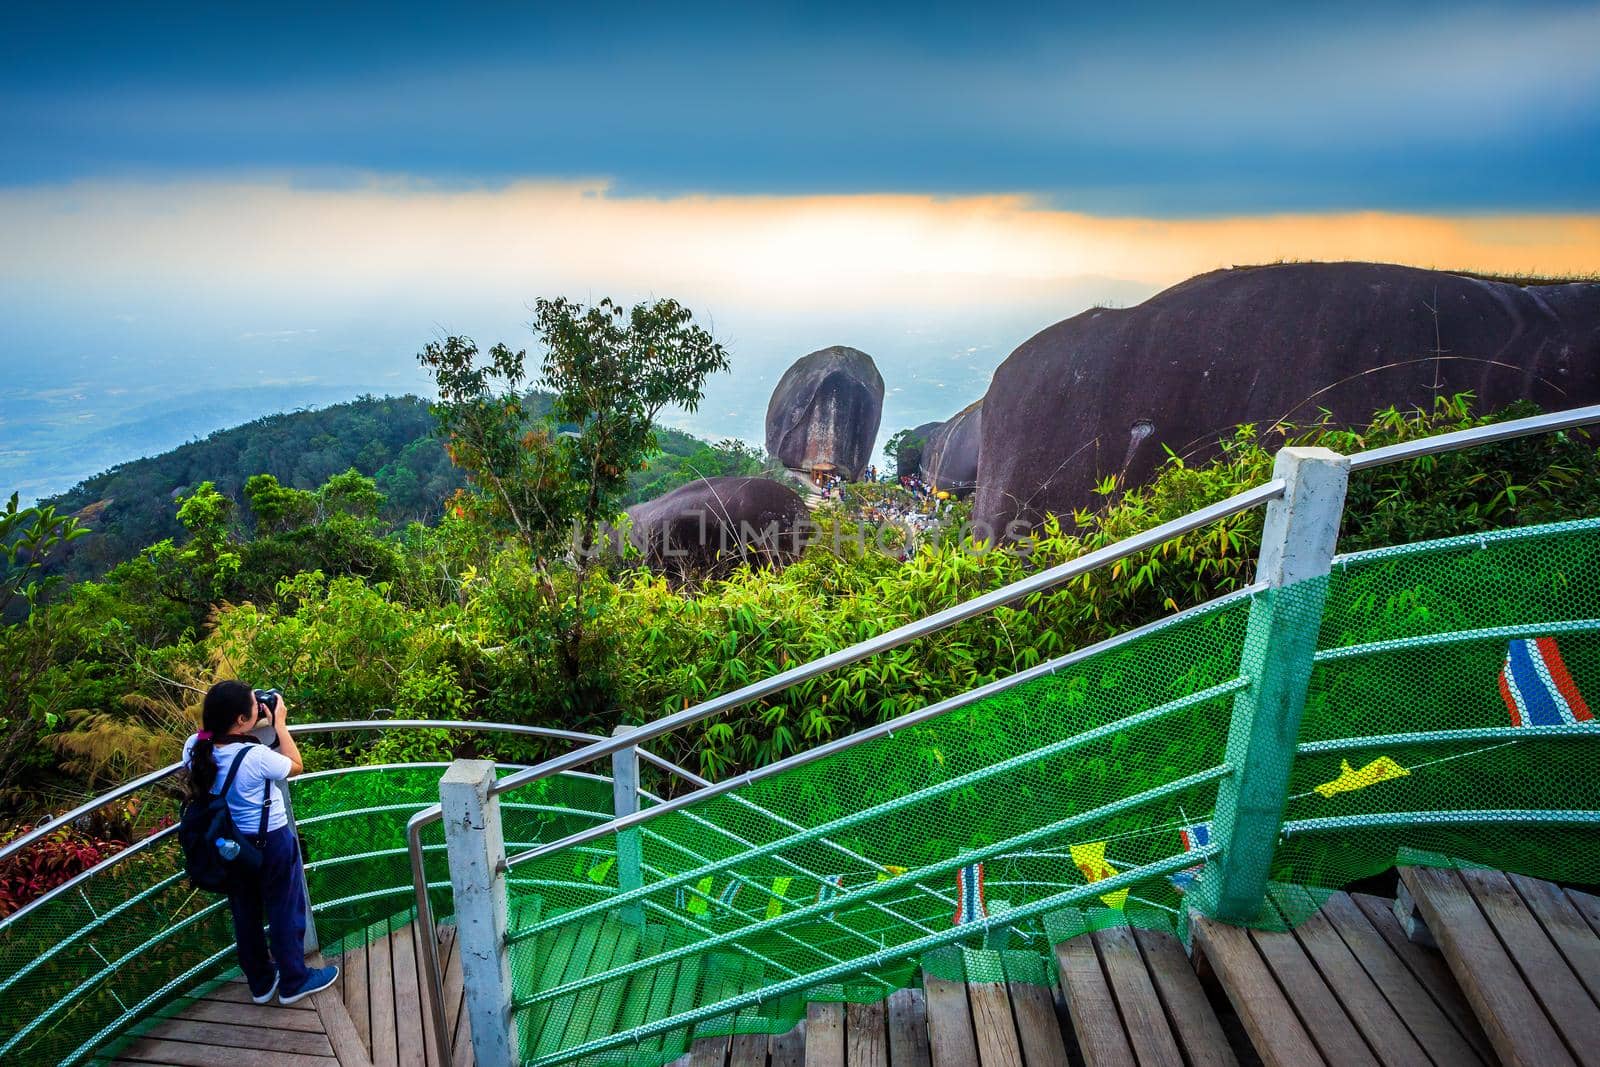 Tourists woman takes pictures of People traveling to worship The stone with the footprint of Lord Buddha at Khitchakut mountain It is a major tourist attraction Chanthaburi,Thailand.